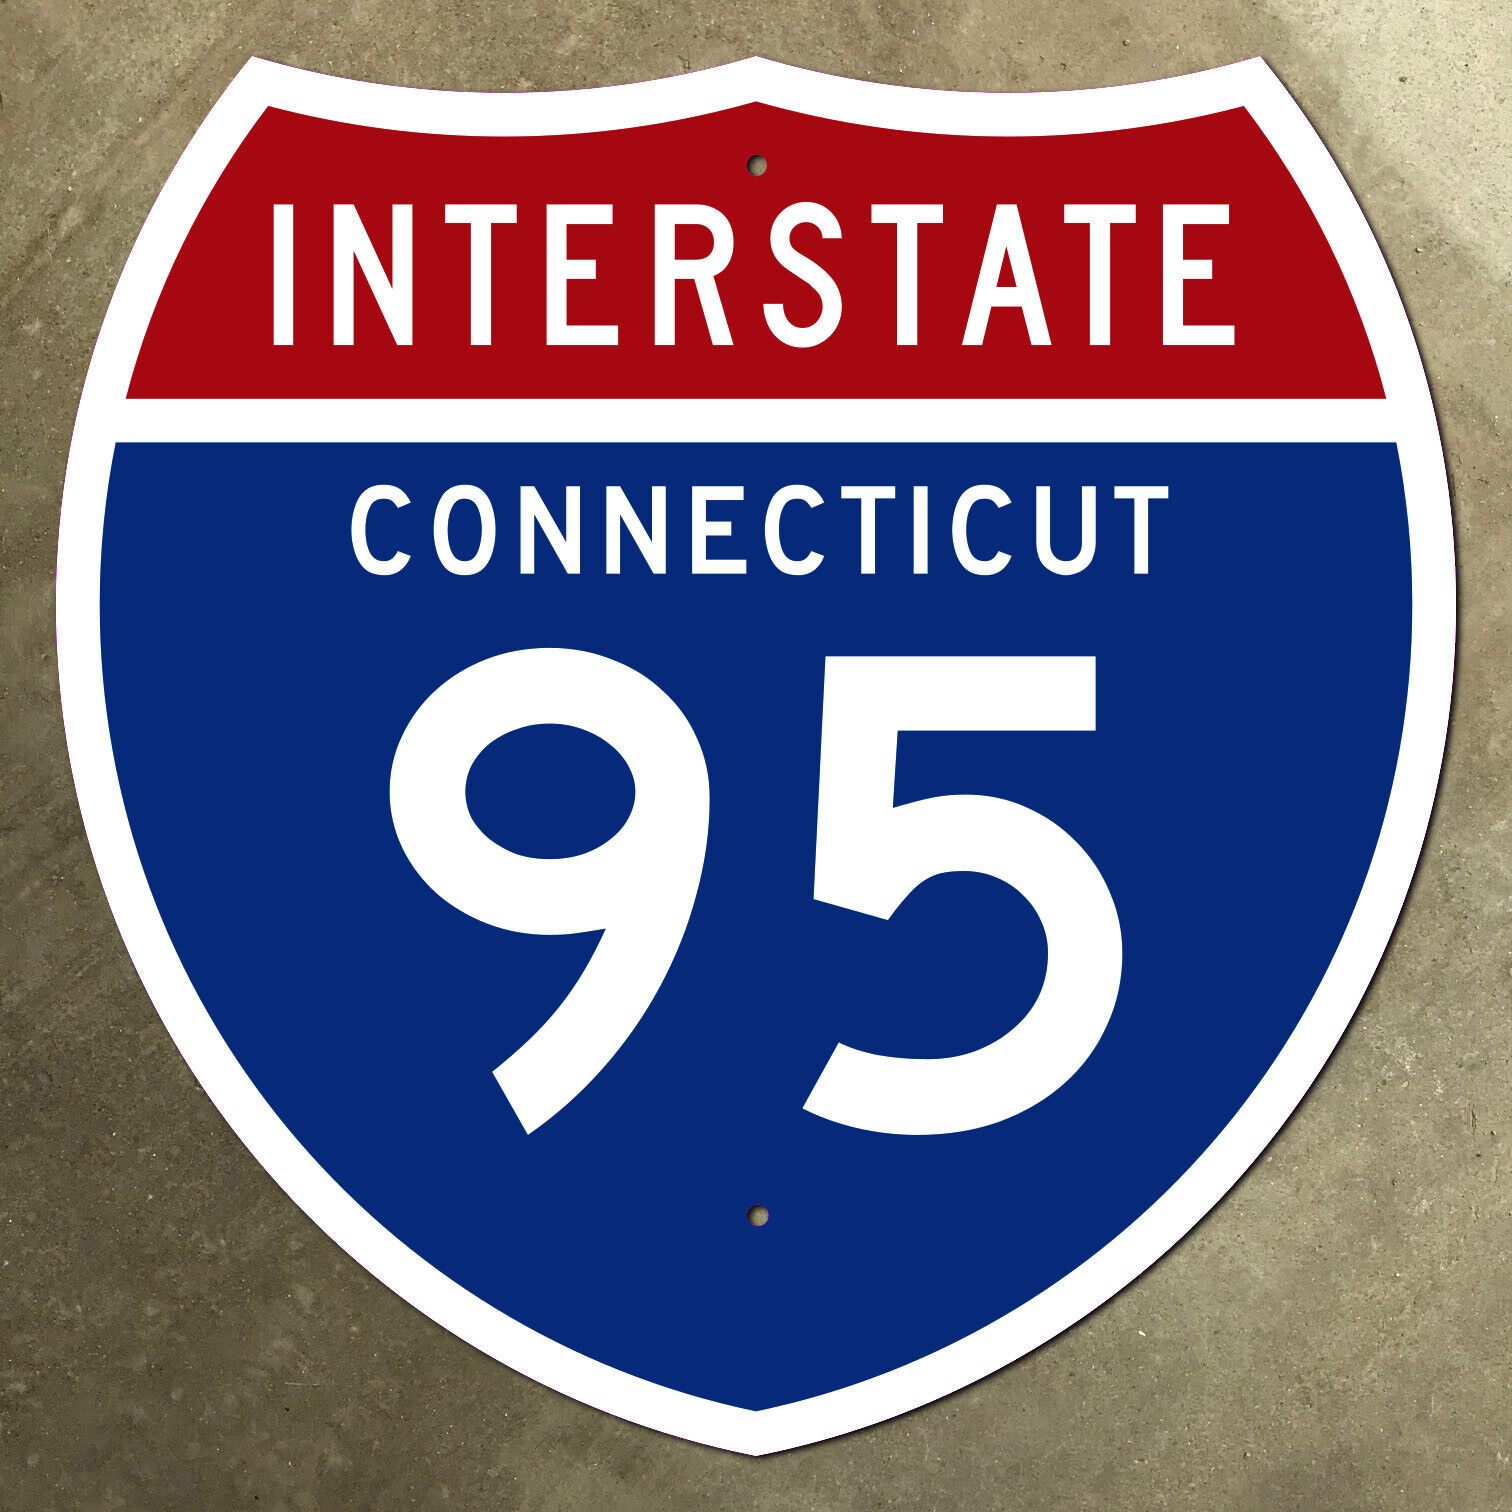 Connecticut interstate route 95 highway marker road sign 1957 New Haven 12x12